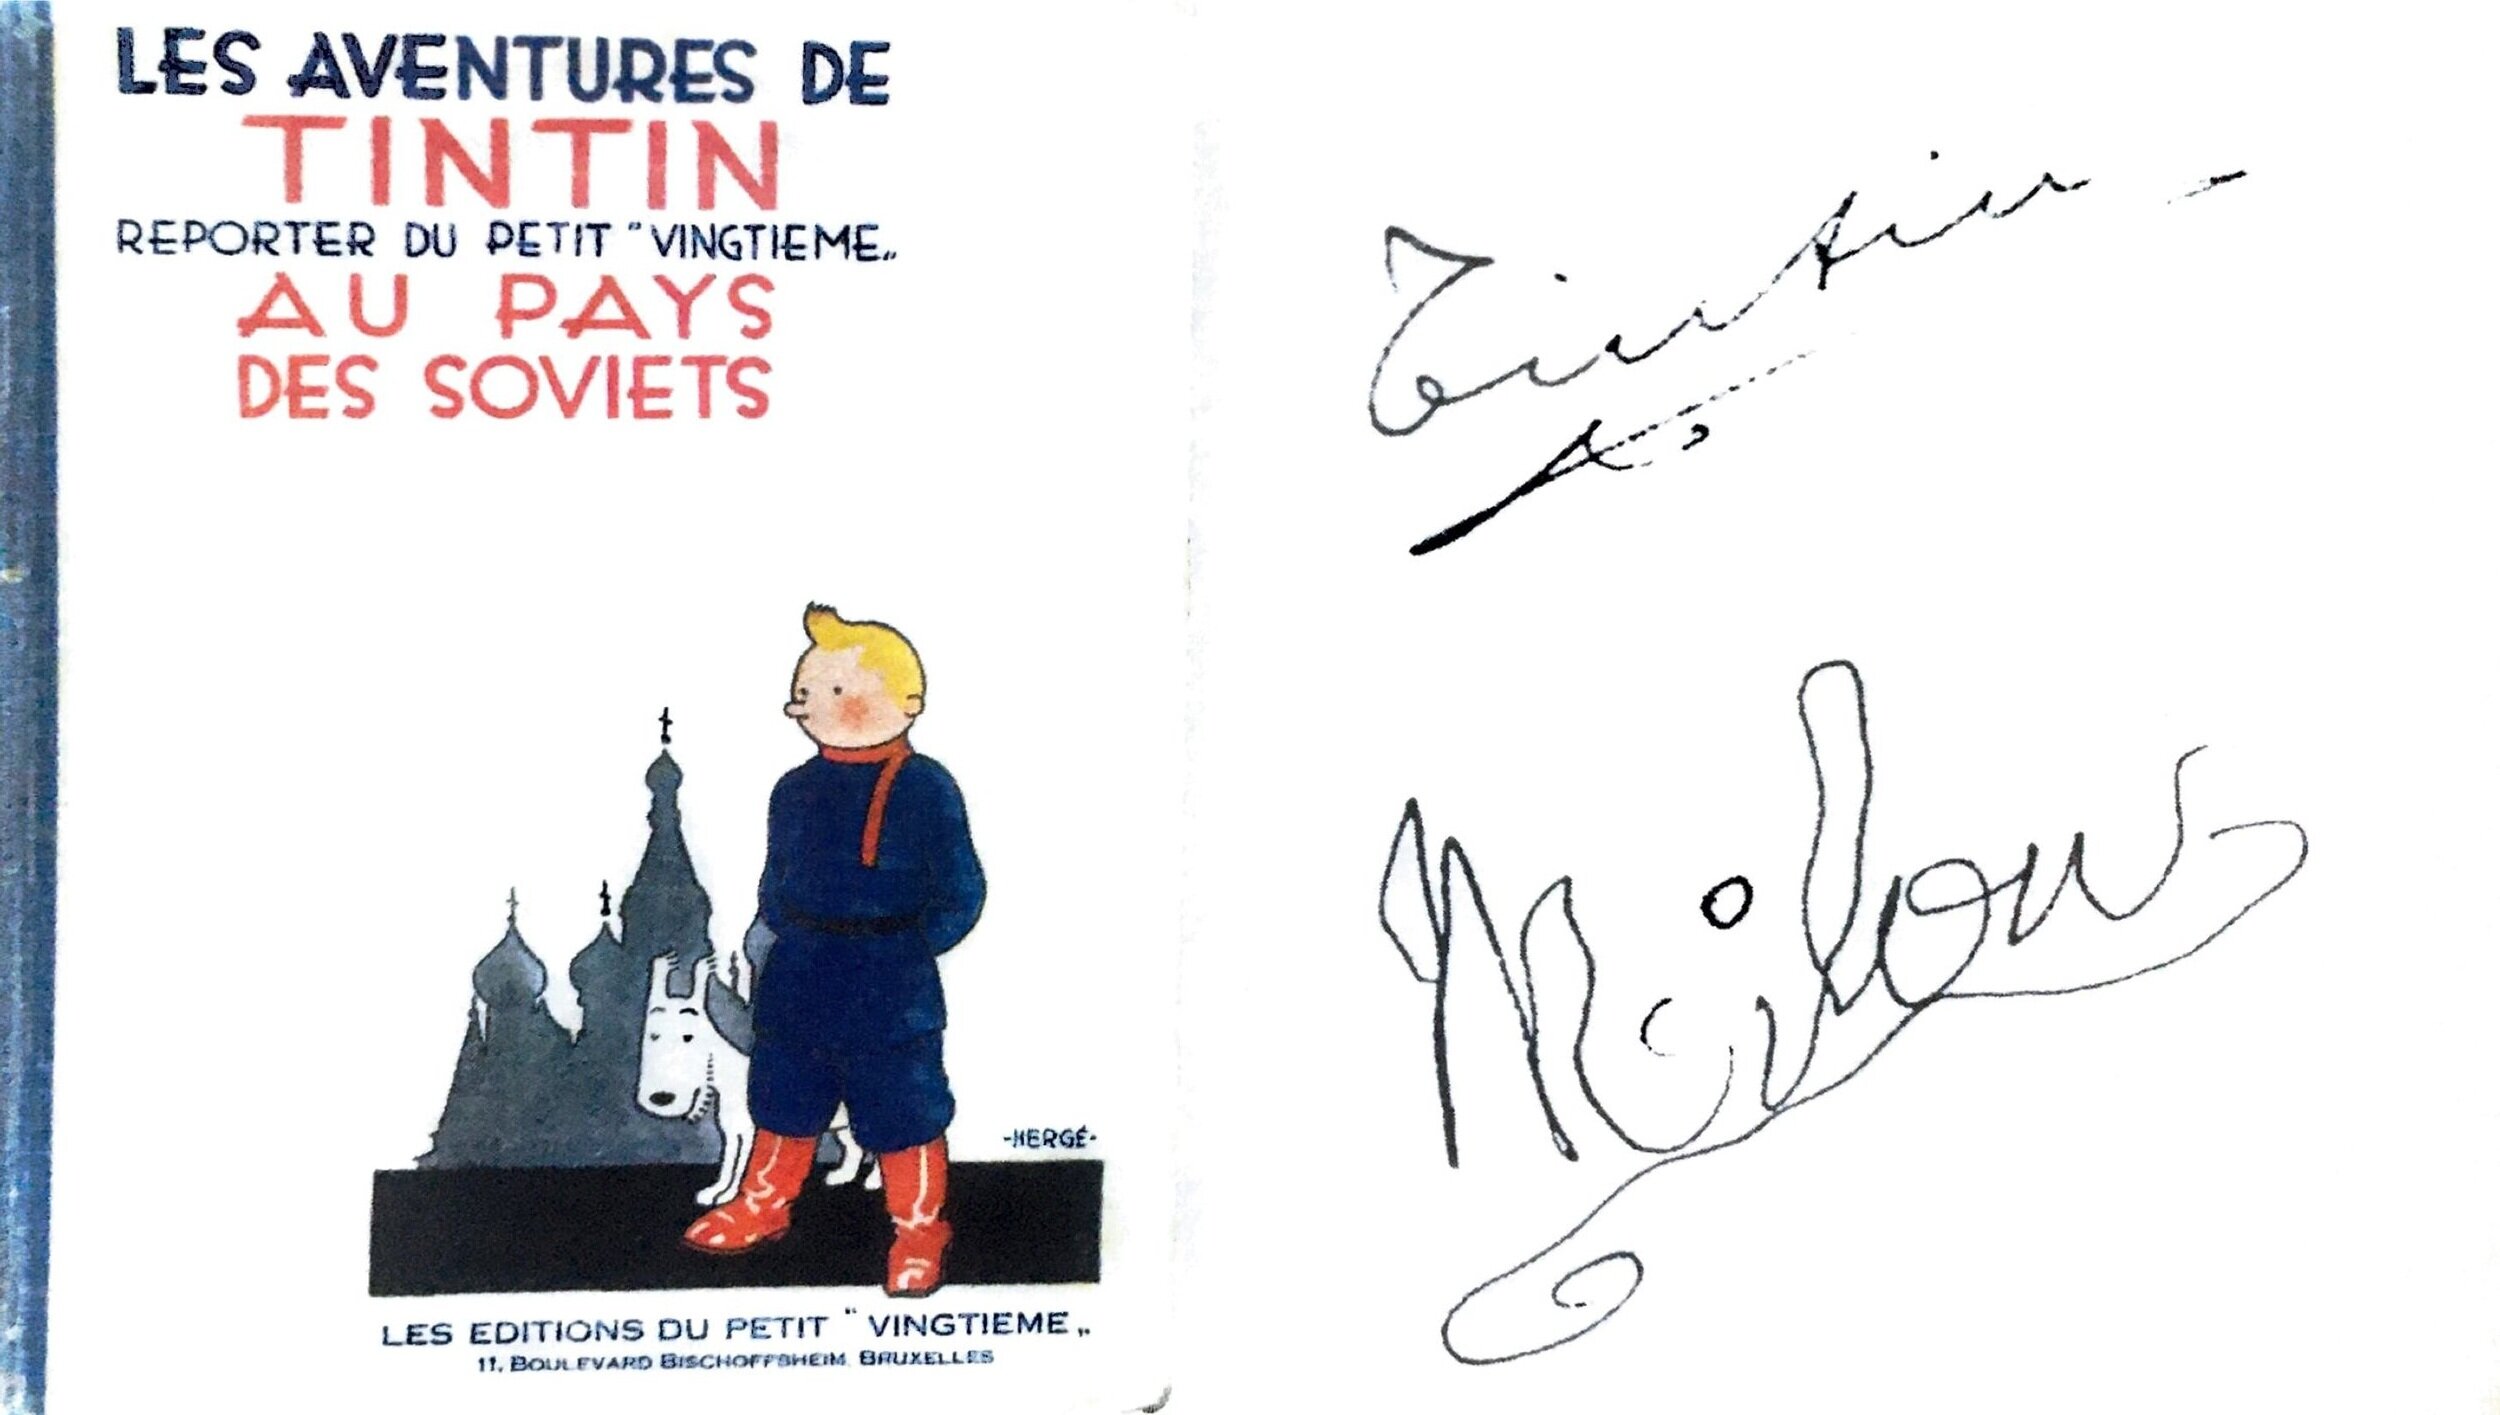  The first 500 copies of ‘Soviets’ were autographed by "Tintin” ( actually Herge ) and “Milou”  (the French name for Snowy, actually Germaine Kieckens, Norbert Wallez’ secretary and later Herge’s wife).   Hergé. Tintin in the Land of the Soviets: Col